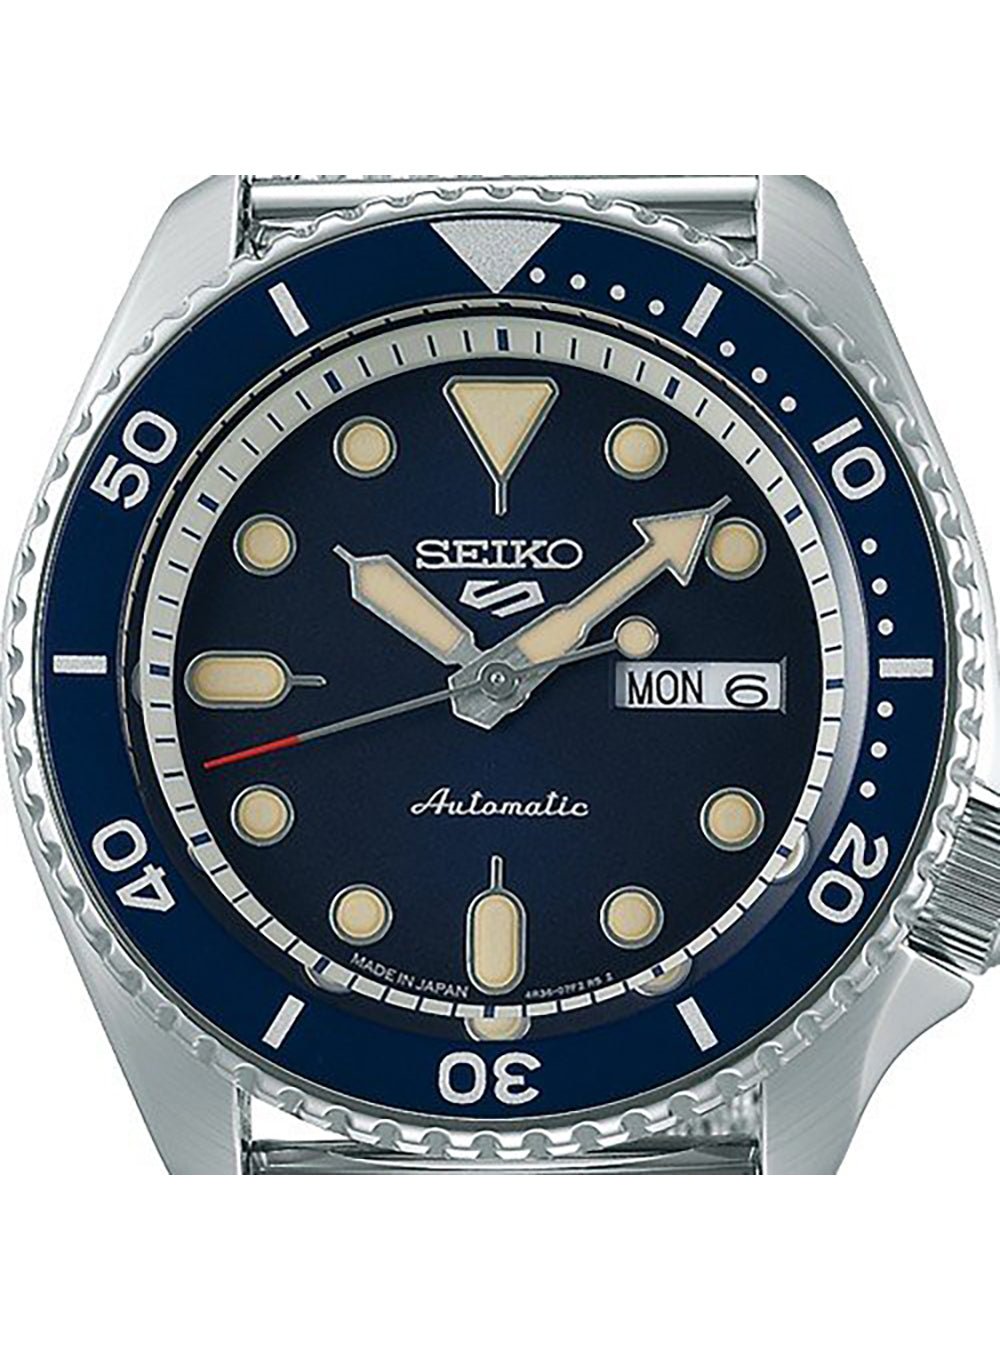 Seiko 5 Sports Suits Style SBSA015 Automatic Watches Mechanical 2019 Made in japan JDMWRISTWATCHjapan-select